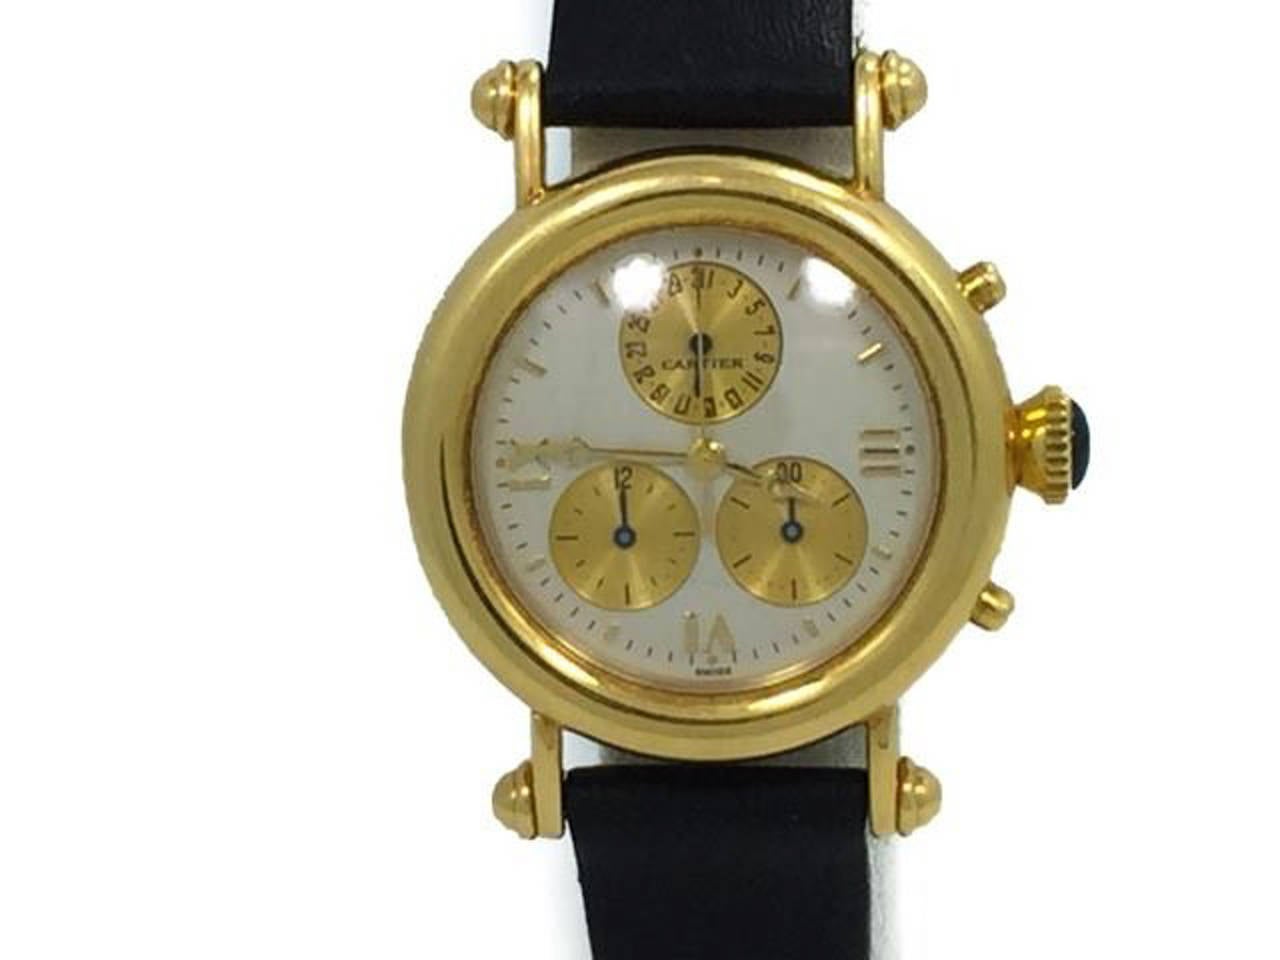 Mens Cartier Diabolo Chronograph Watch in Solid 18k Yellow Gold. The Watch is In Excellent Condition and Keeping Great Time, the Movement is Battery Operated. Band and Buckle are Generic. Included is a Cartier Pouch.